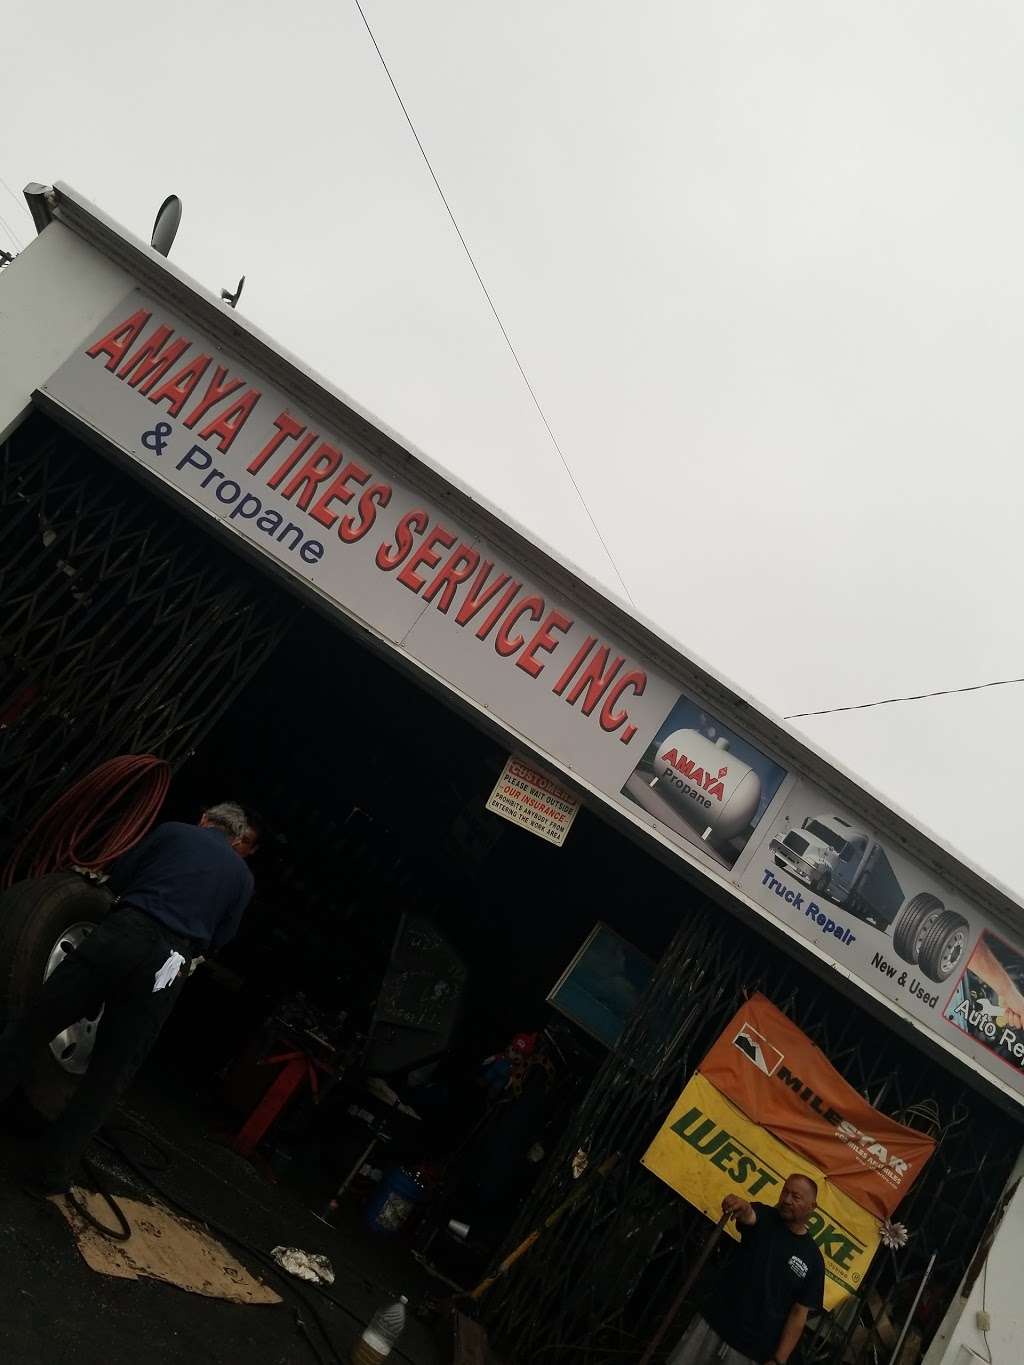 Amaya Tires 24 Hours Road Services | Photo 2 of 10 | Address: 6206 S Main St, Los Angeles, CA 90003, USA | Phone: (323) 234-2423